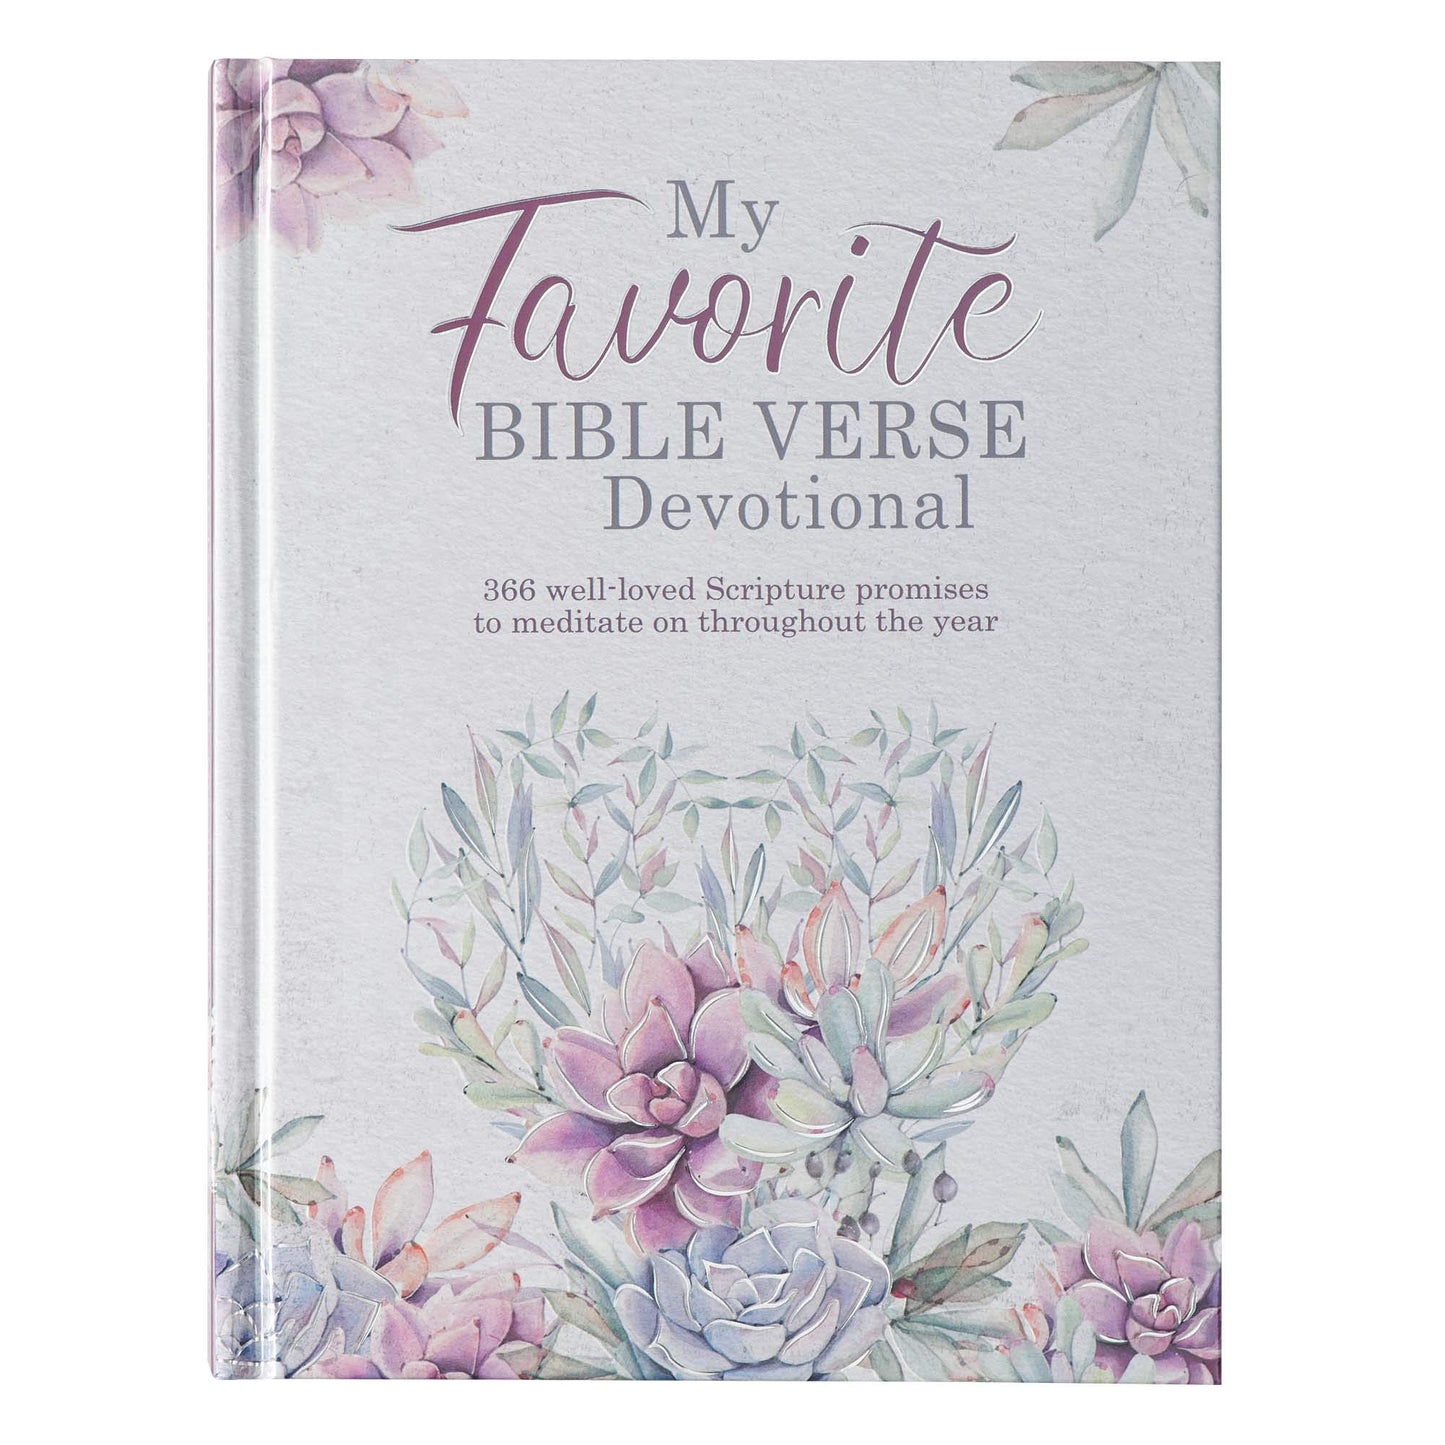 My Favorite Bible Verse Daily Devotional For Women - 366 Well-loved Scripture Promises to Mediate on Throughout the Year